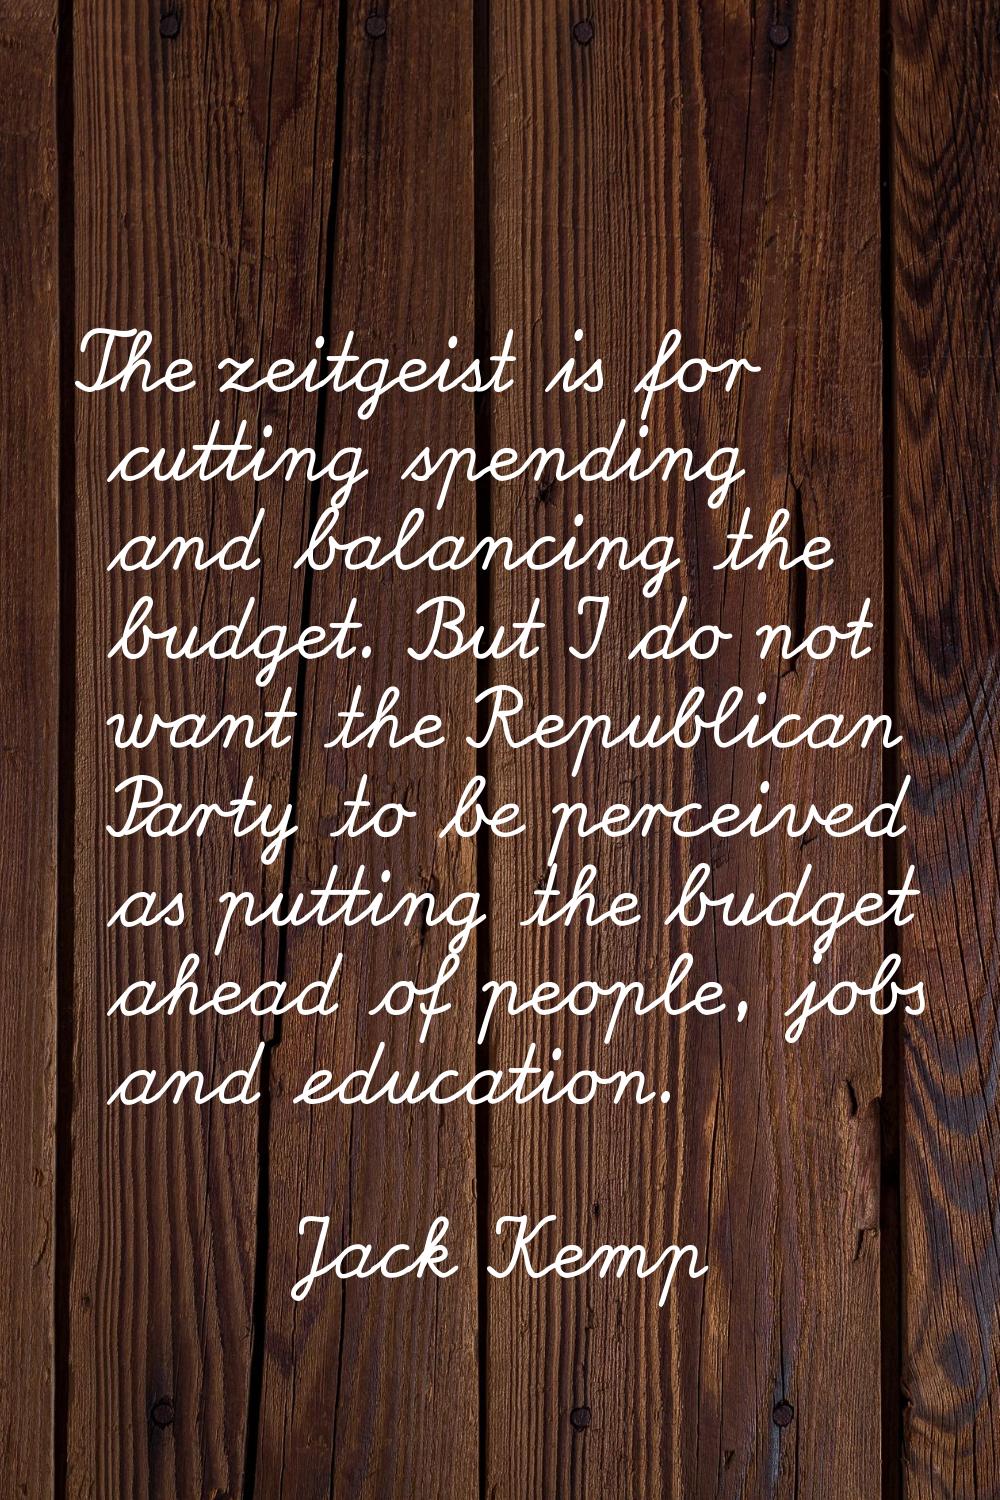 The zeitgeist is for cutting spending and balancing the budget. But I do not want the Republican Pa